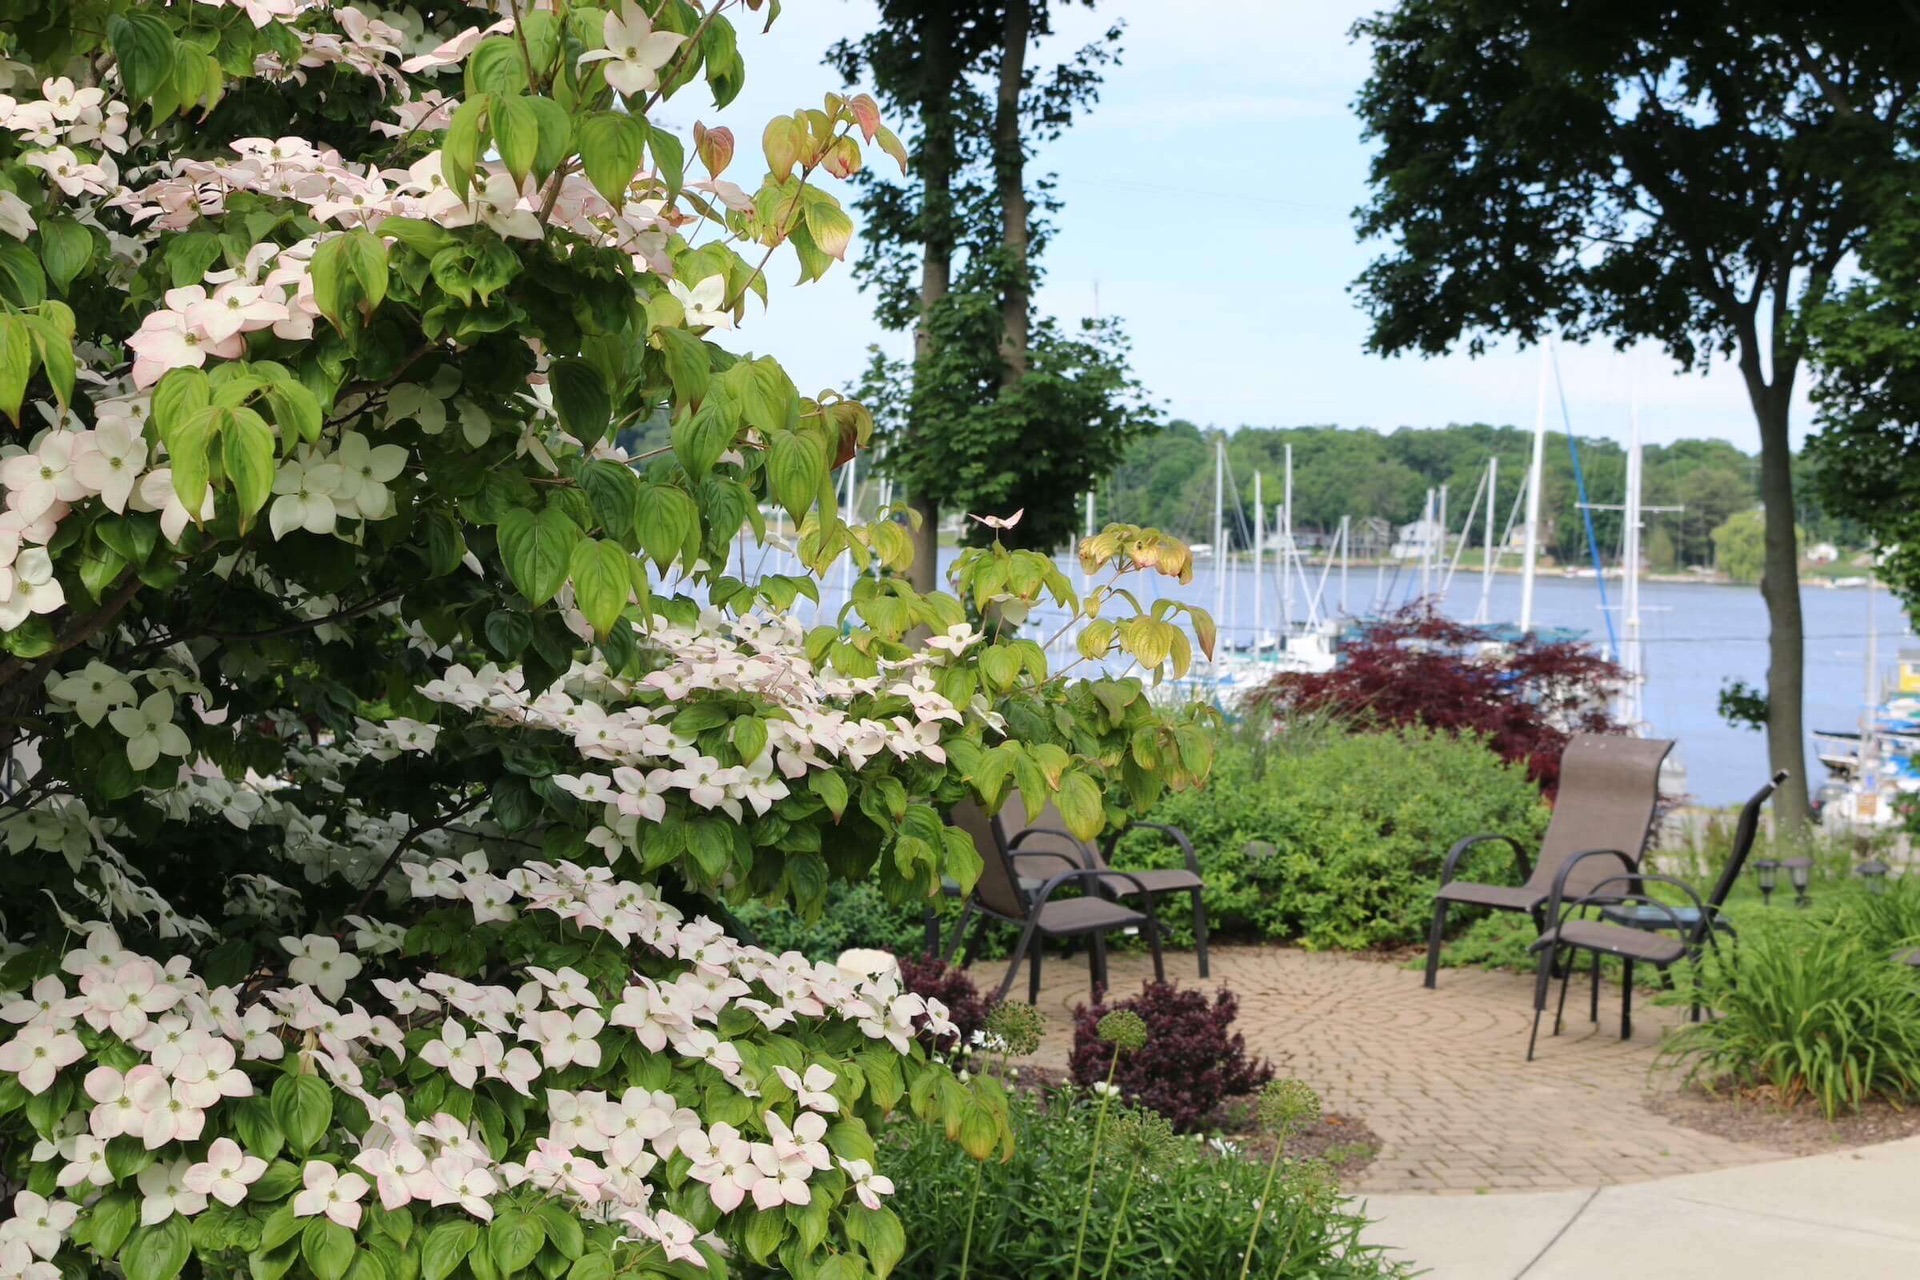 Lakeside patio with sailboats in the background